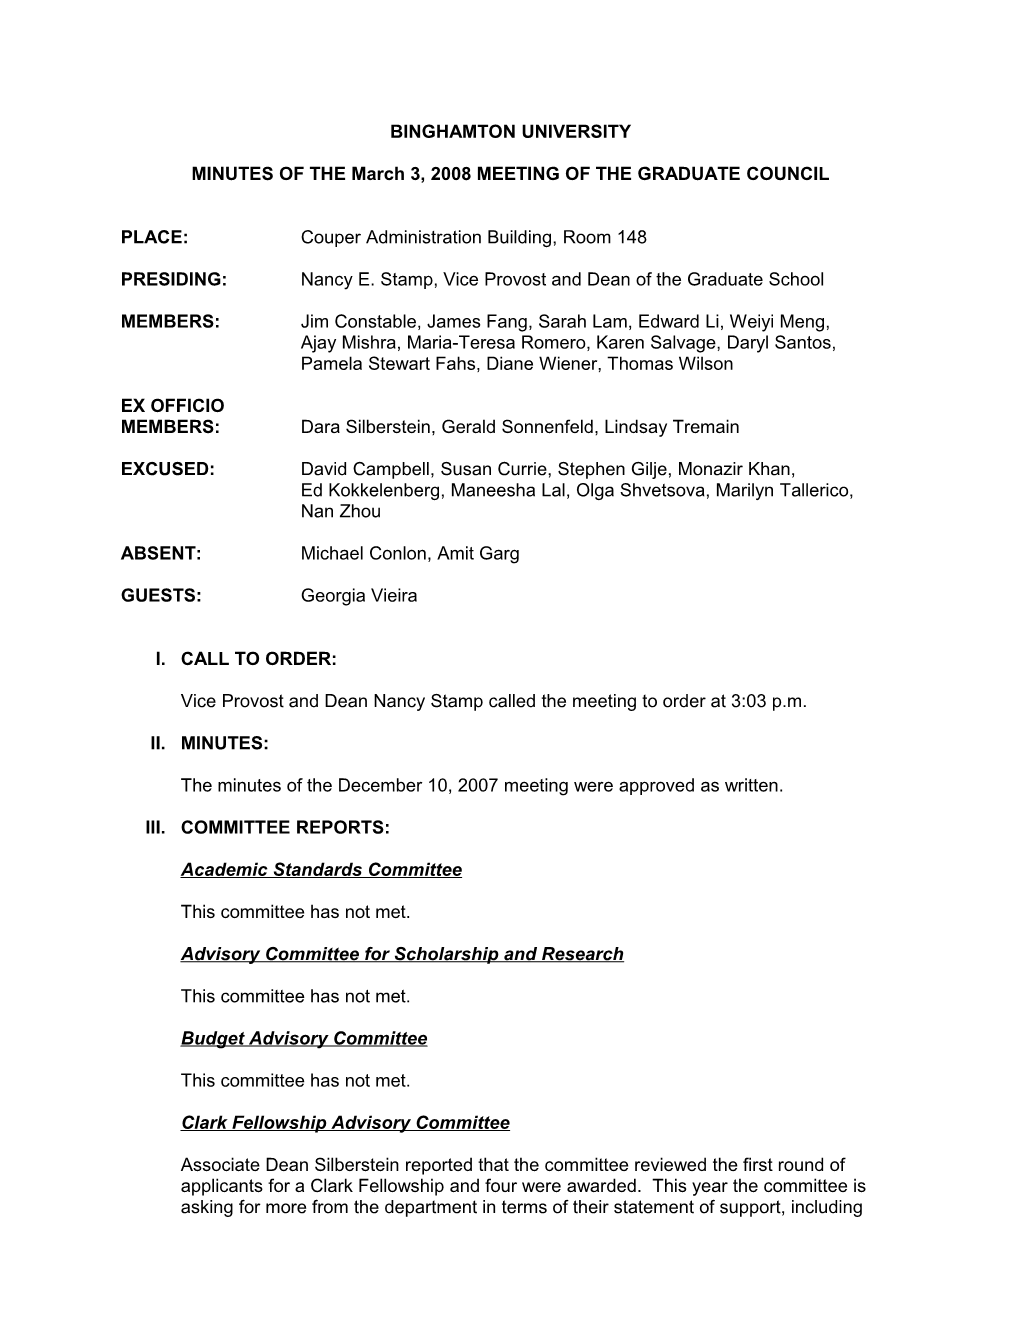 MINUTES of the March 3, 2008MEETING of the GRADUATE COUNCIL